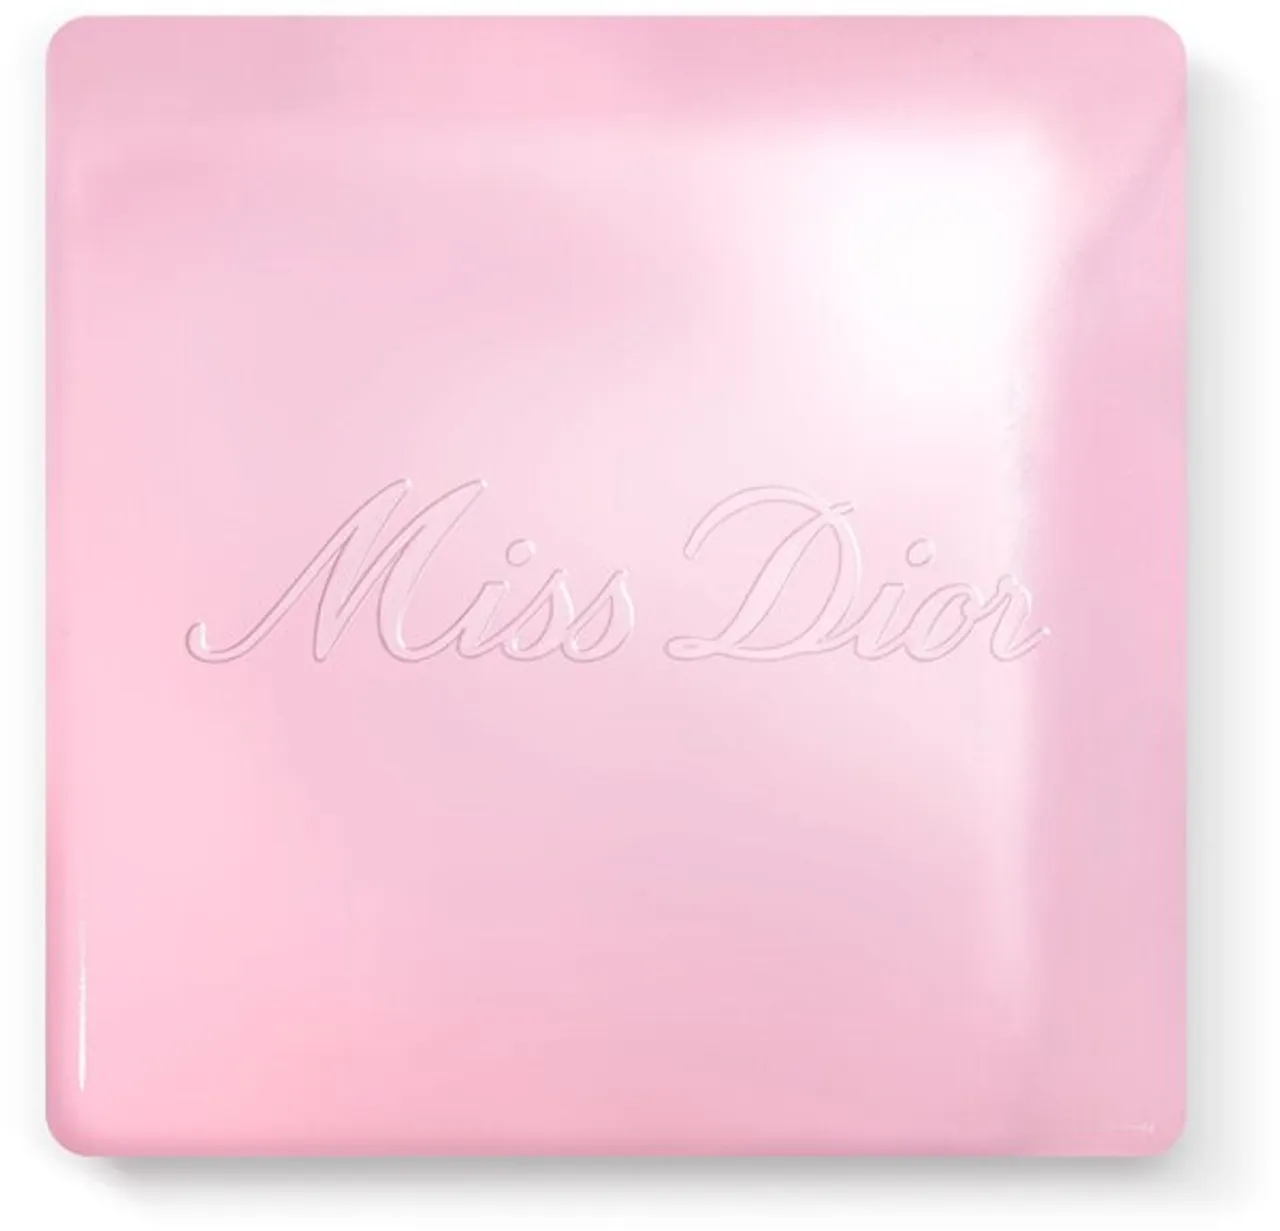 DIOR Miss Dior Blooming Scented Soap Feste Seife 120 g